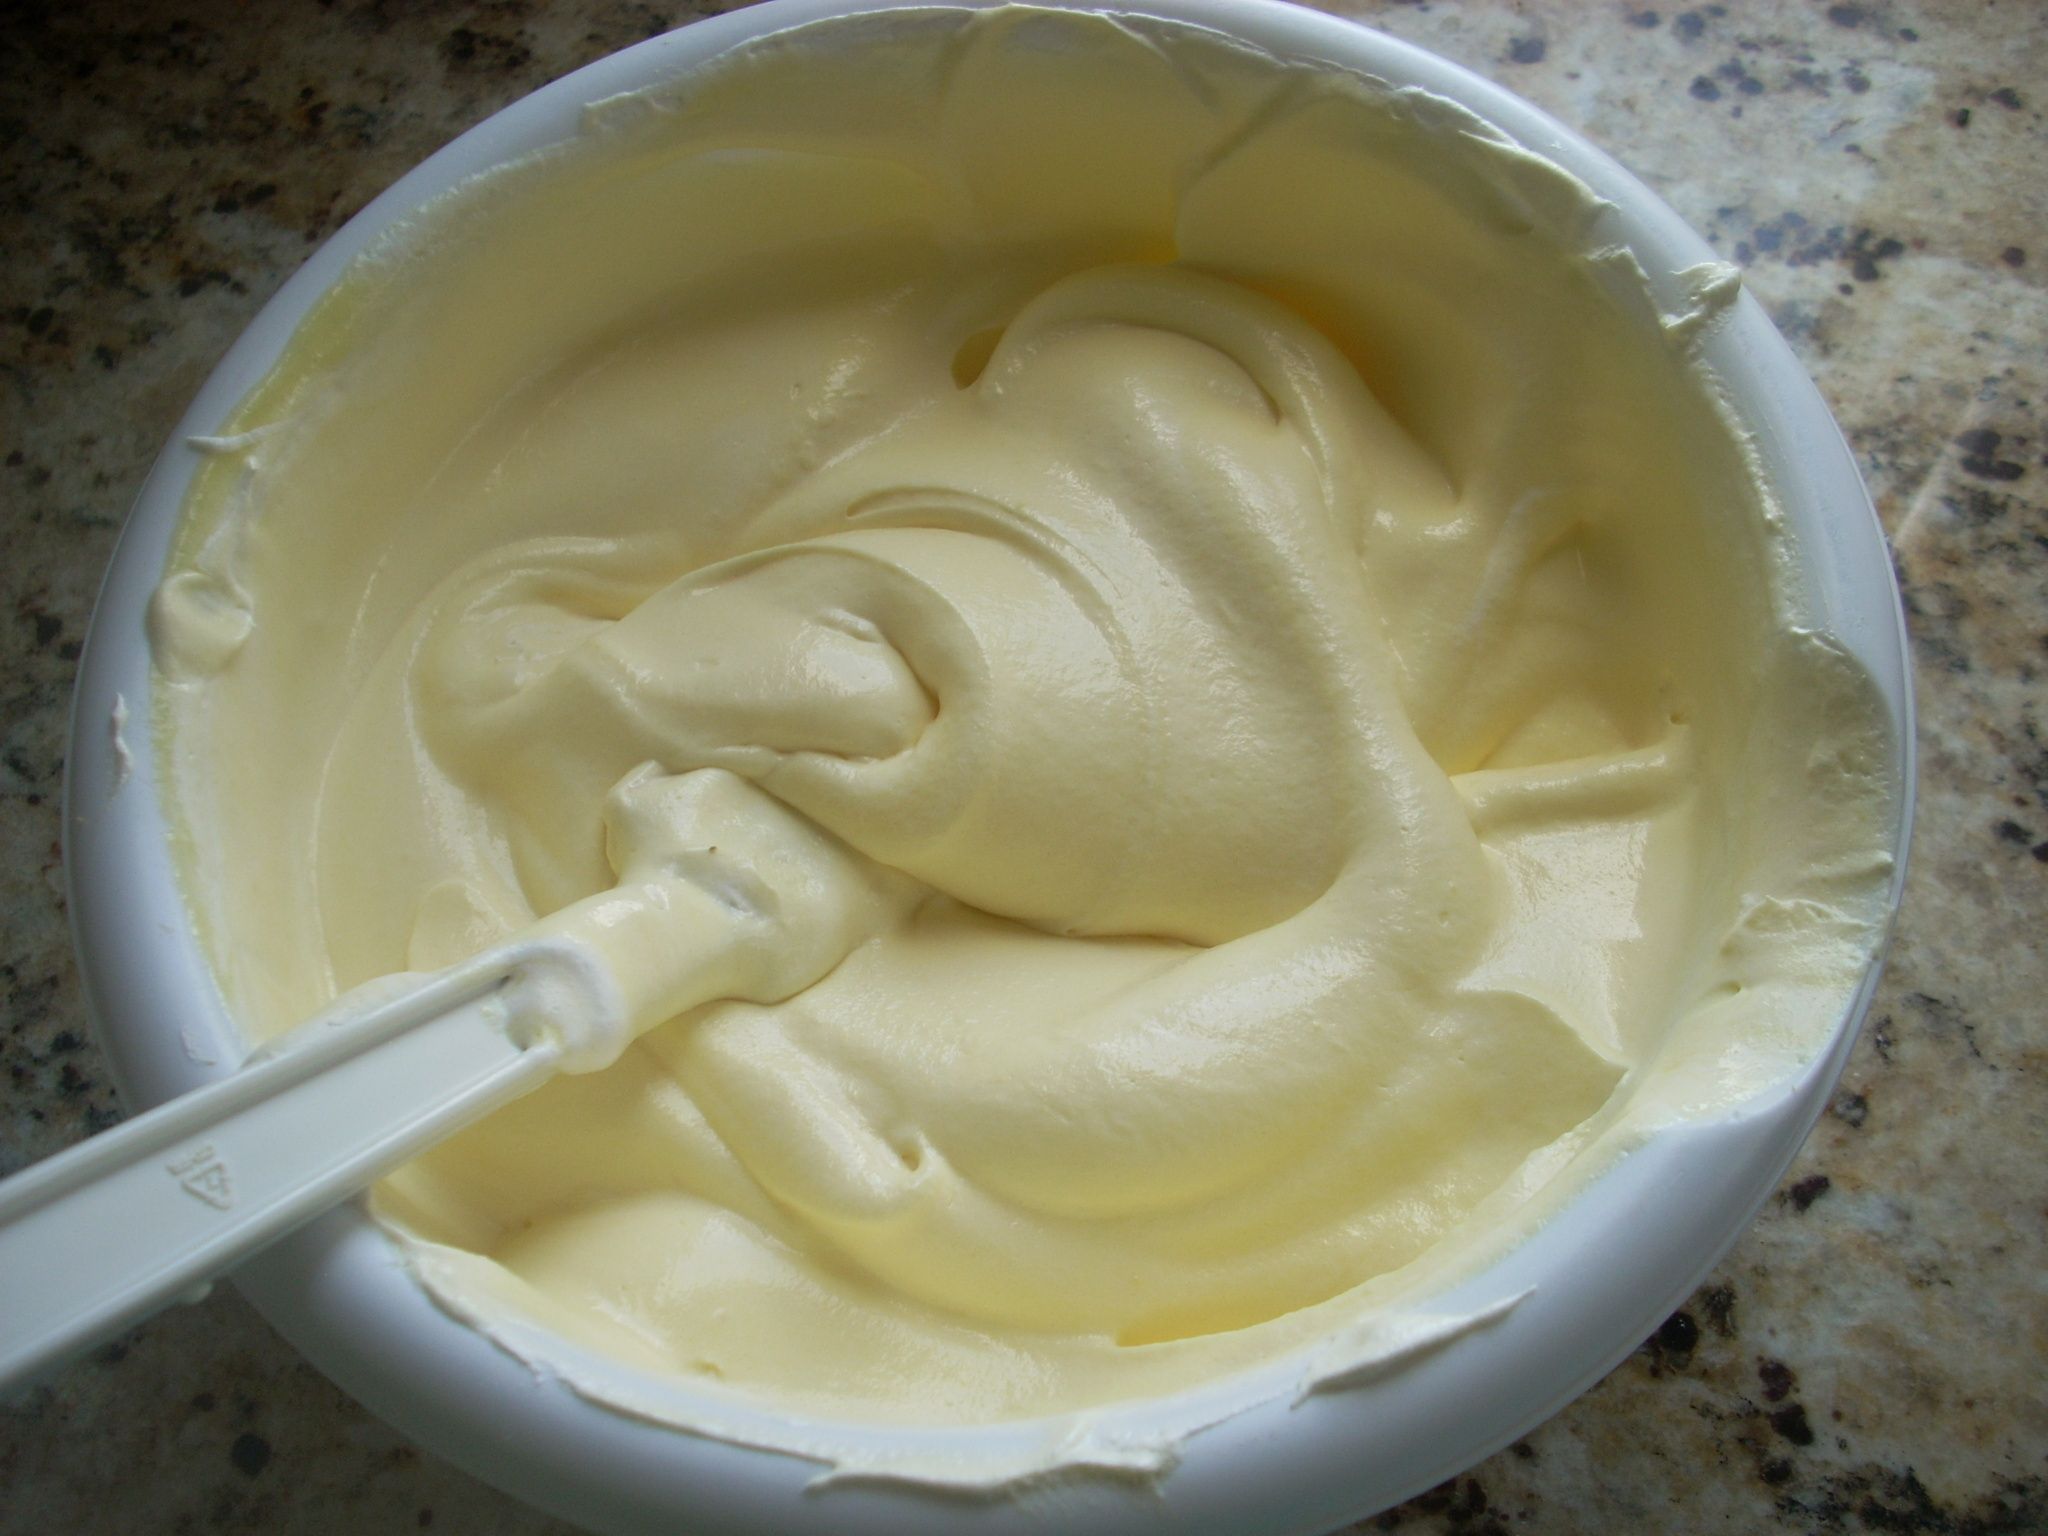 The best icing!! All you do is mix one vanilla pudding packet with half of the m